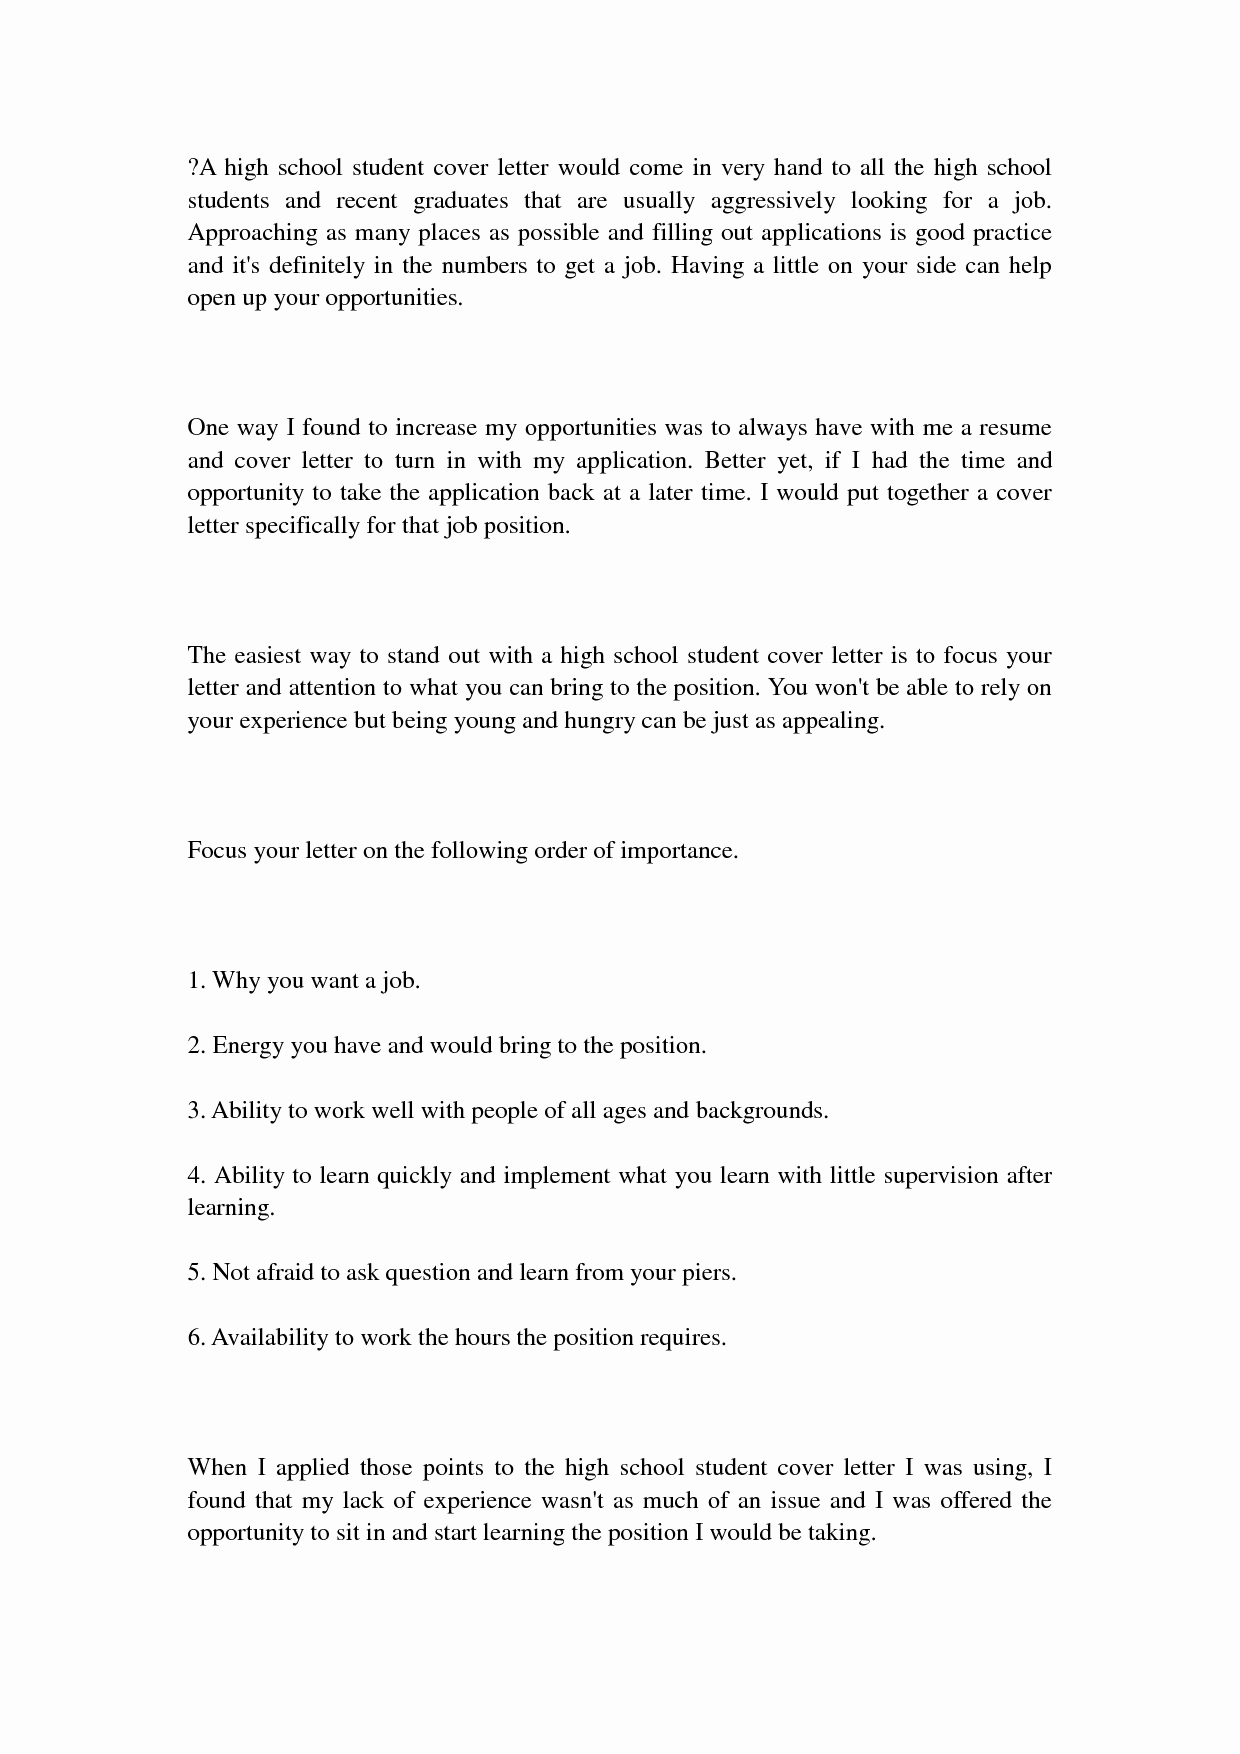 Sample Cover Letter for High School Student with No Work